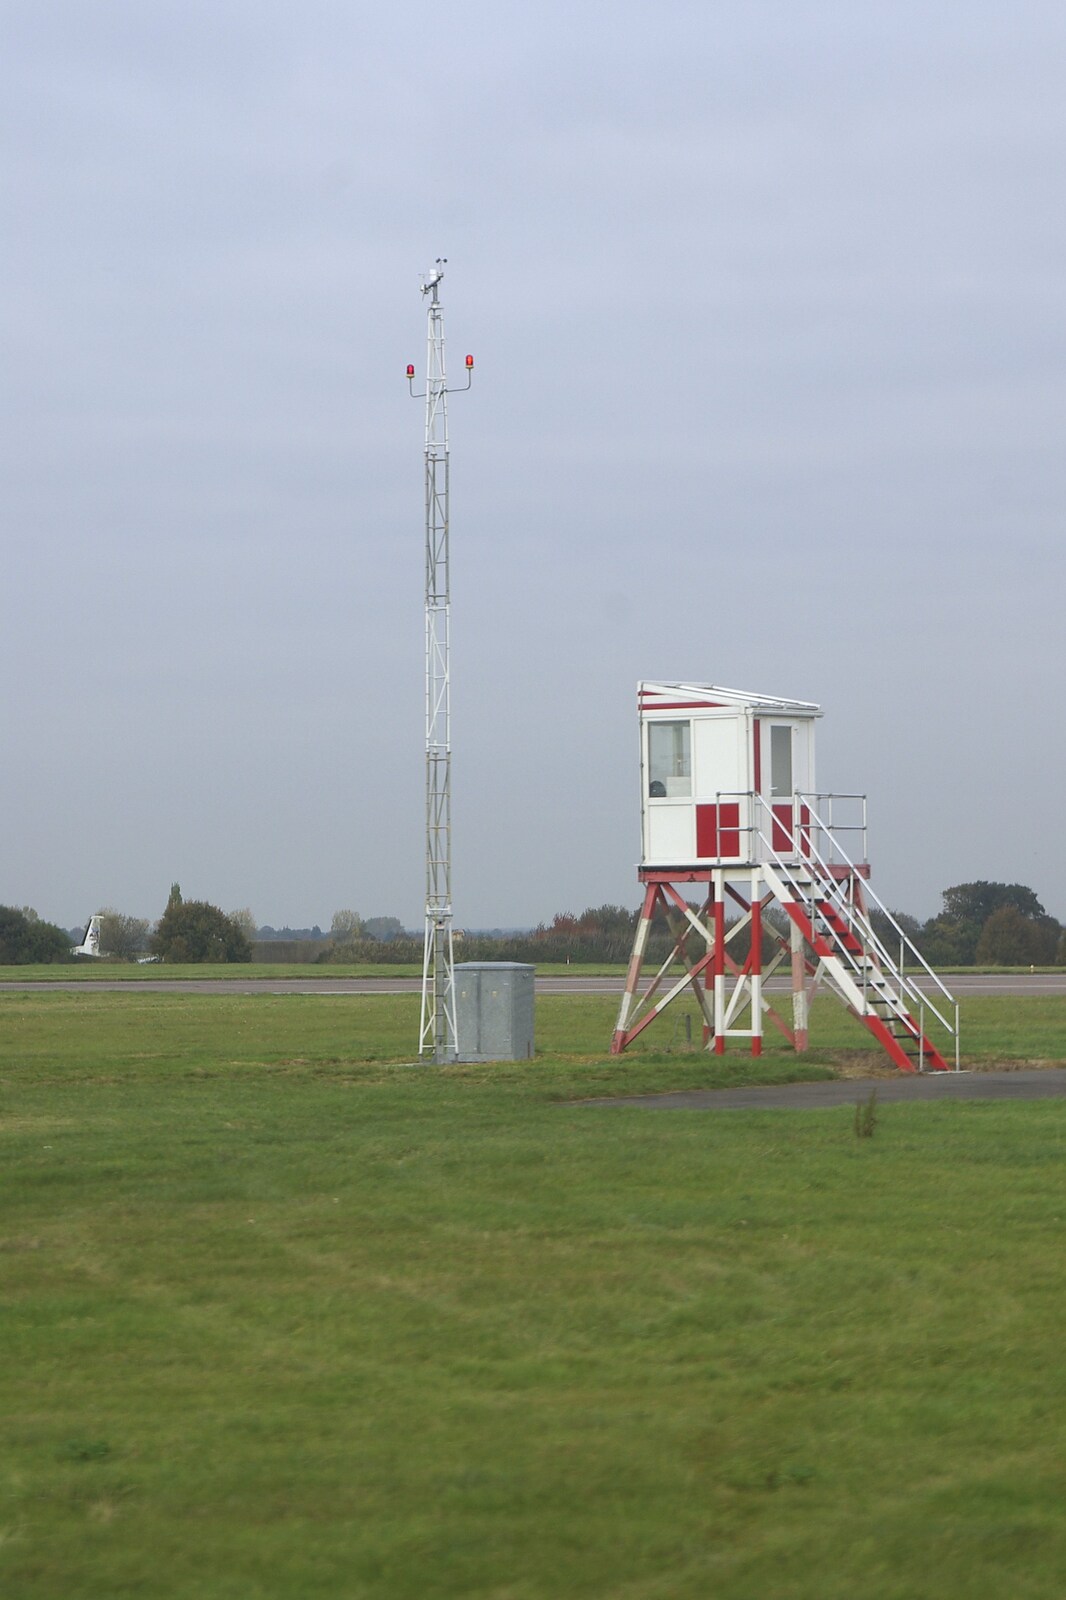 Isobel's 30th in Blackrock, and Apple Pressing, Carleton Rode and Dublin, Norfolk and Ireland - 2nd November 2007: A stray lifeguard watch-tower has been left by the runway